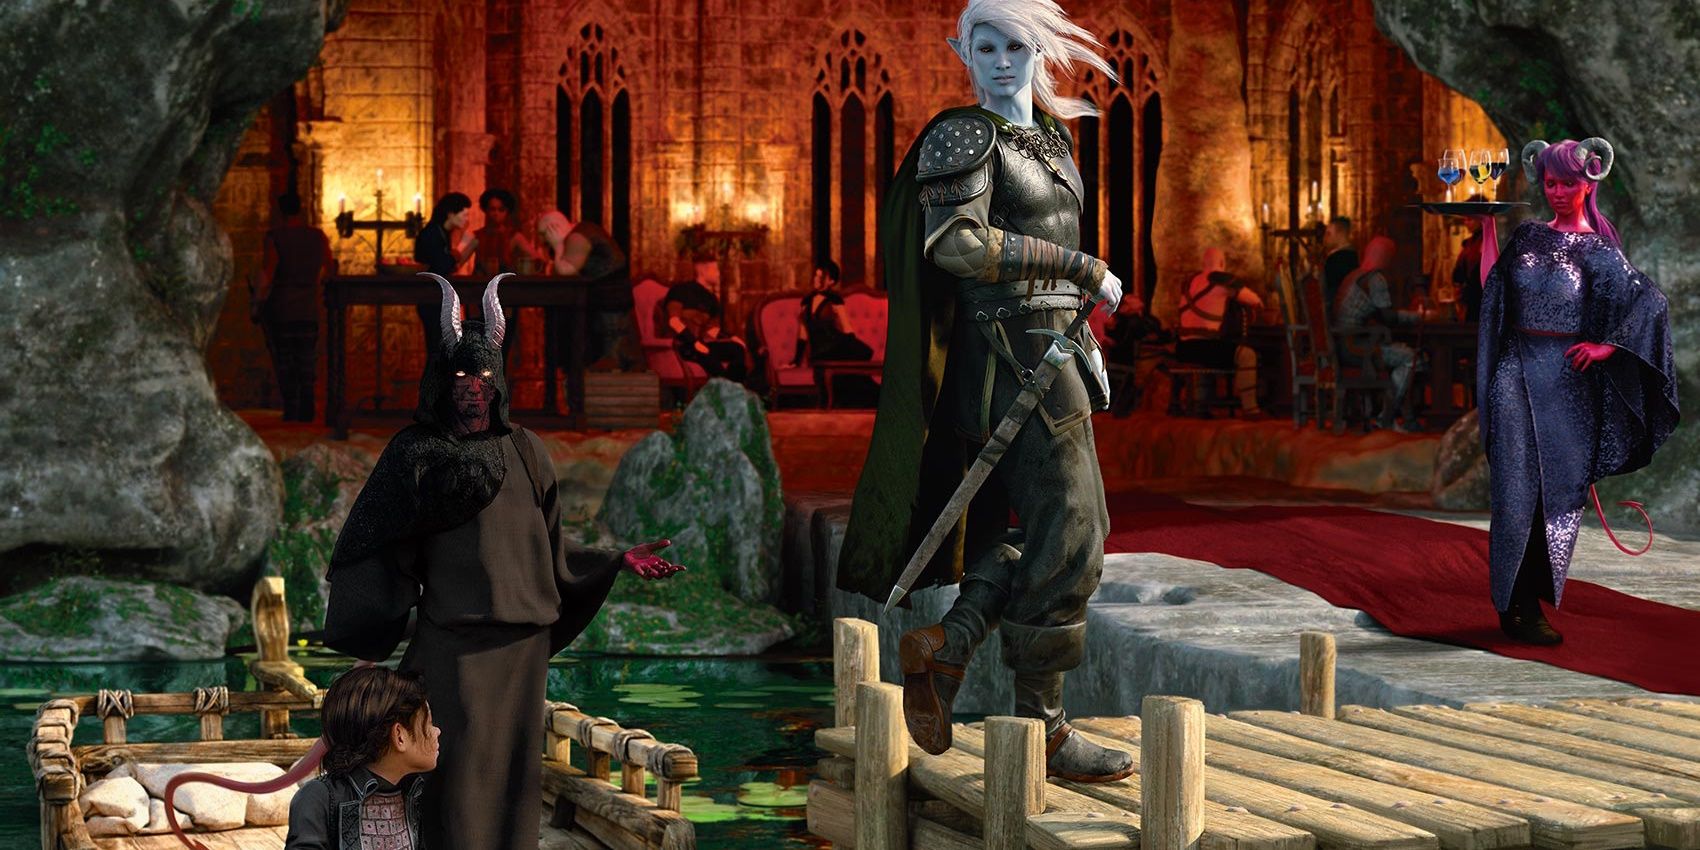 A group arrives by boat at a luxurious location, greeted by a tiefling with a drinks tray.